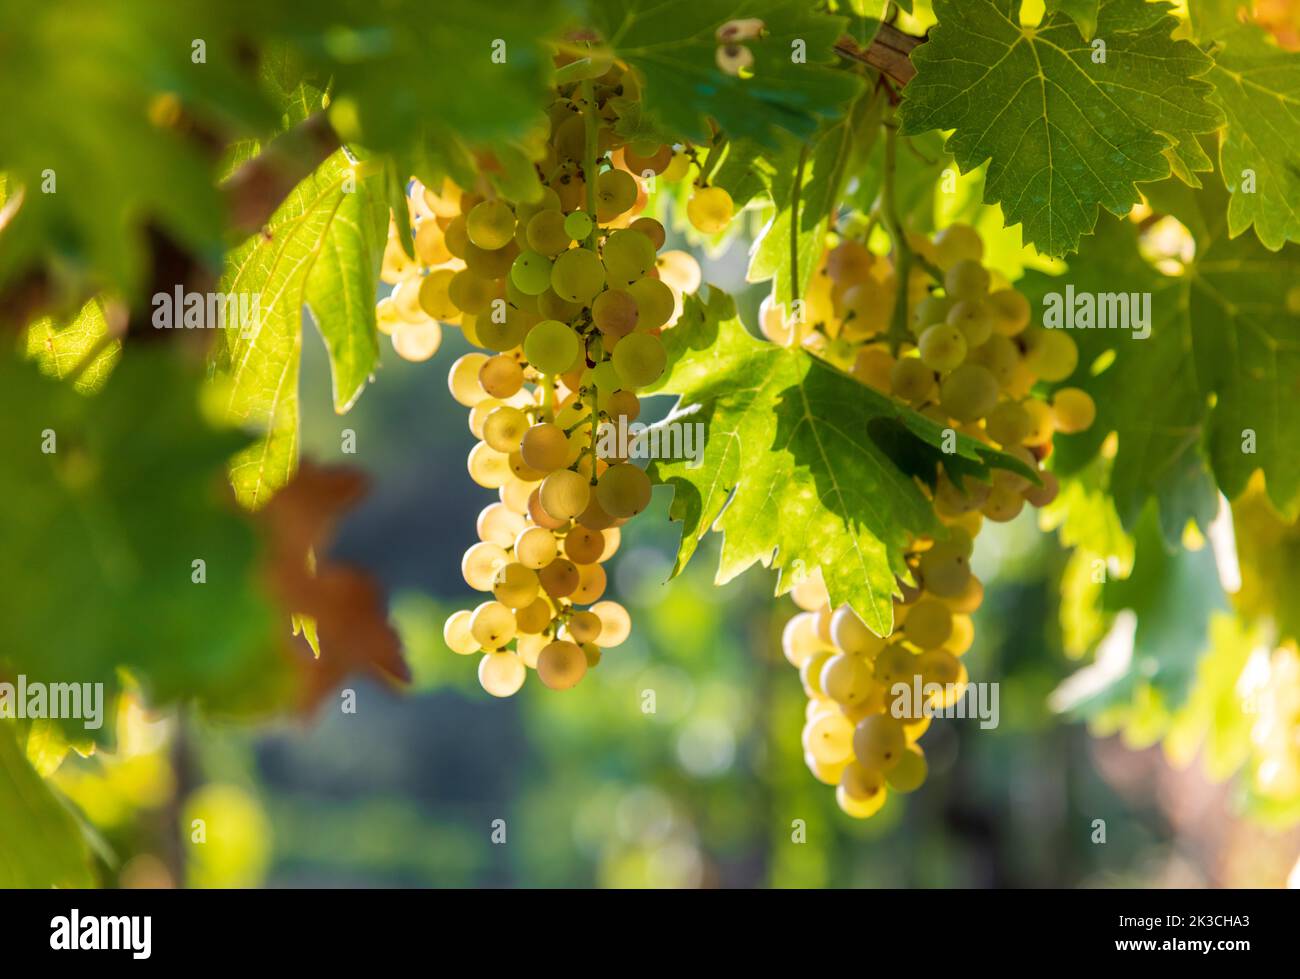 Soft focus of bunches of ripe white grapes hanging on branch with green leaves under bright sunlight in garden Stock Photo